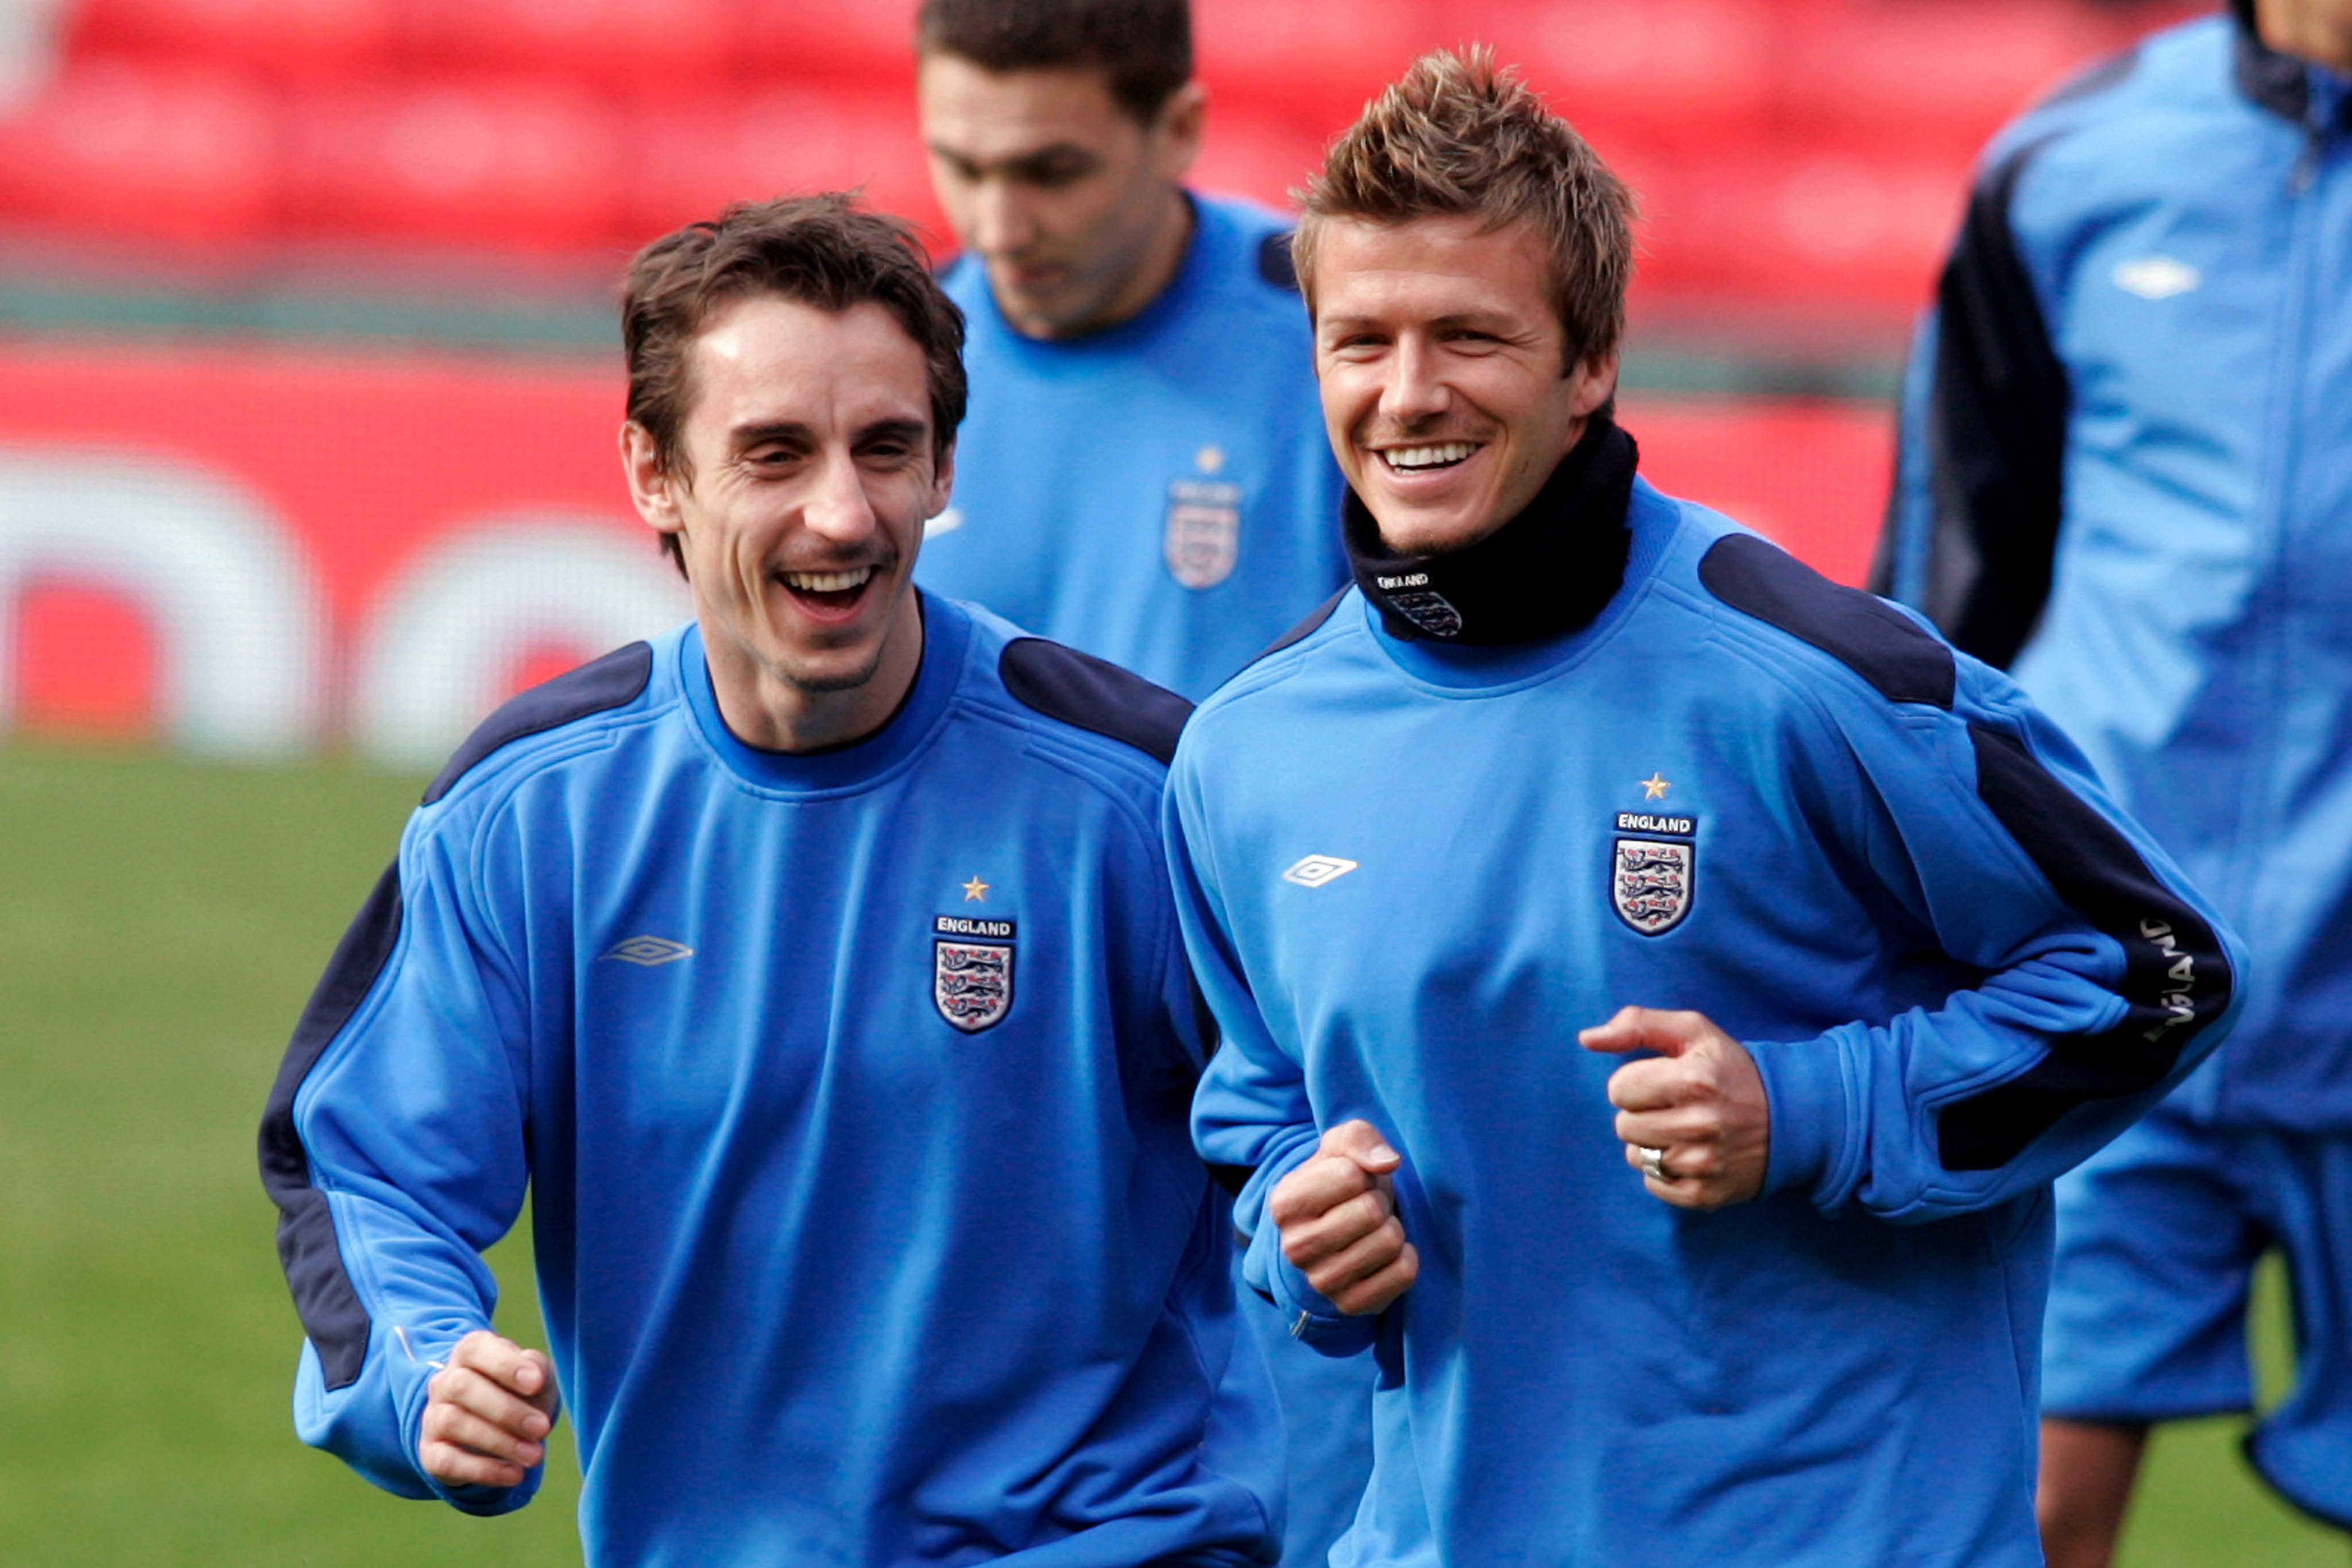 Gary Neville (left) shares a joke with David Beckham during a training session